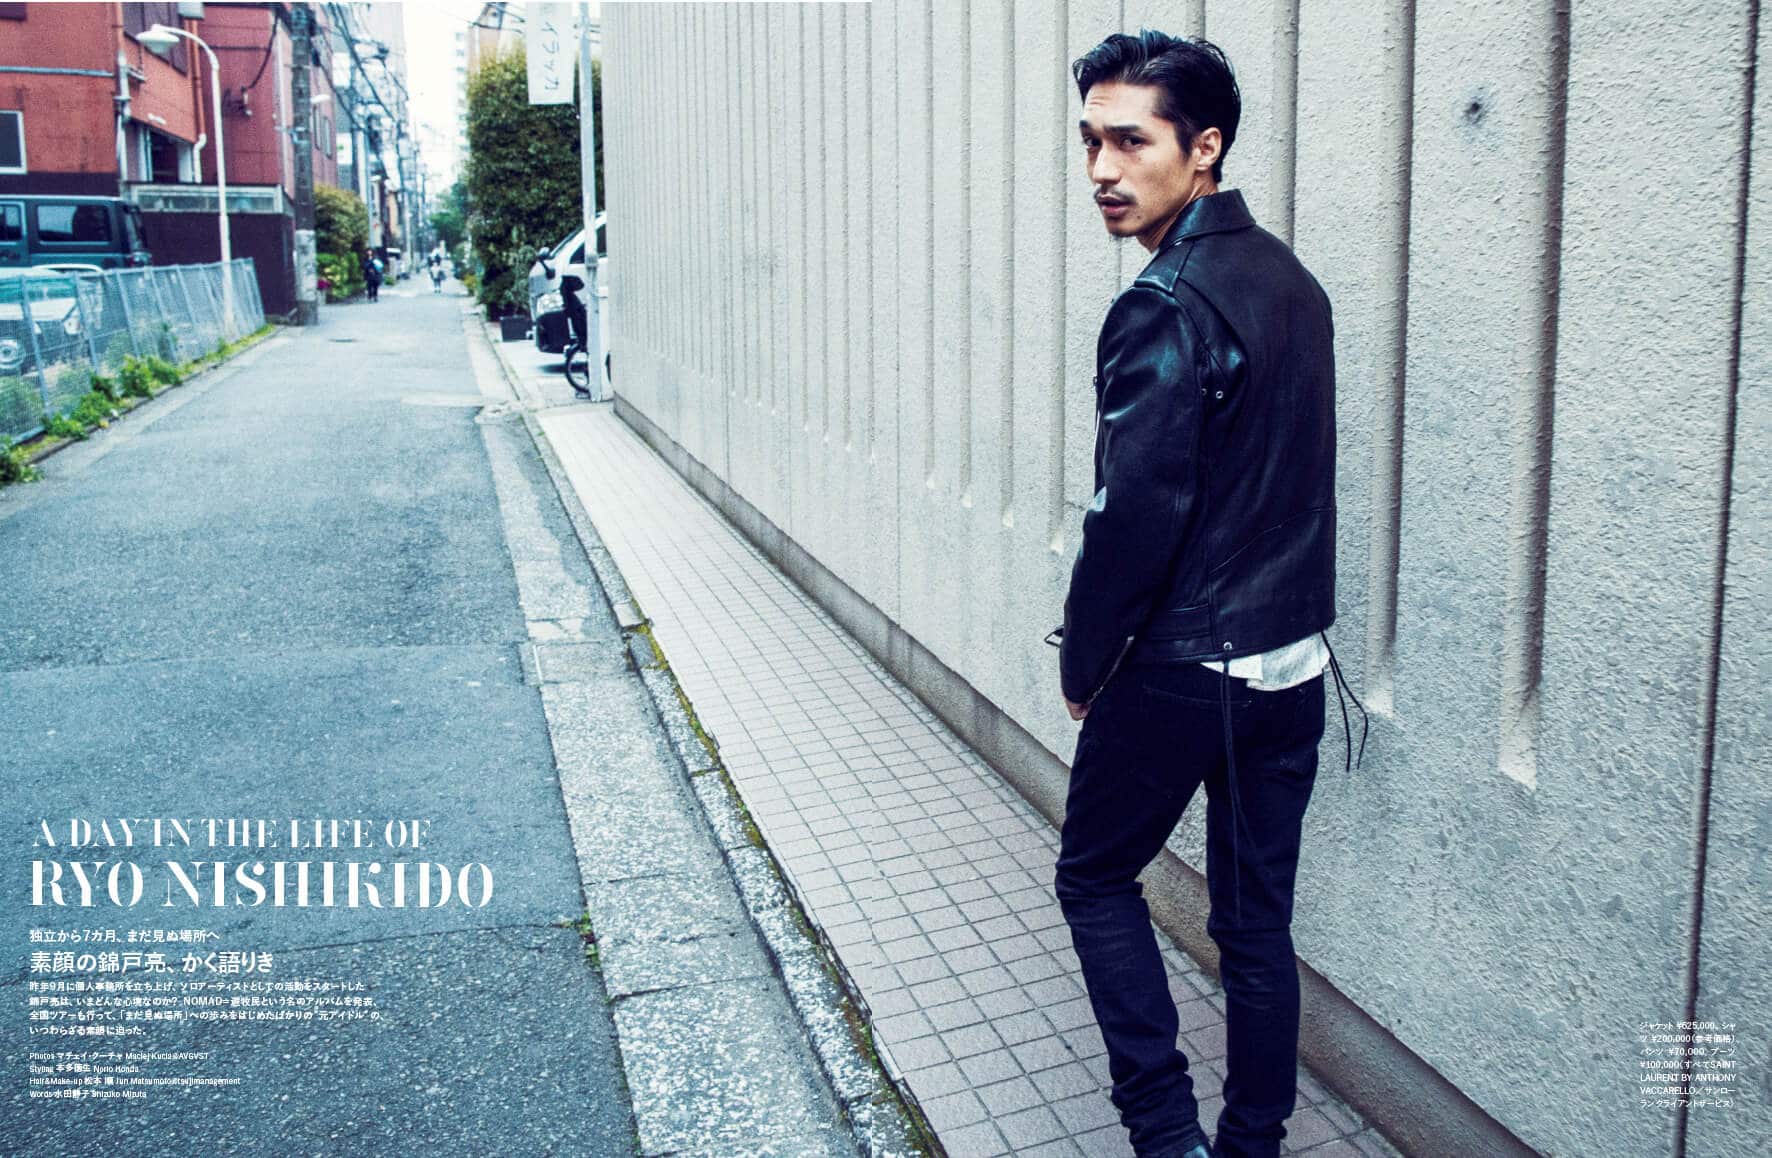 20 Top Japanese Actors Most Handsome and Talented